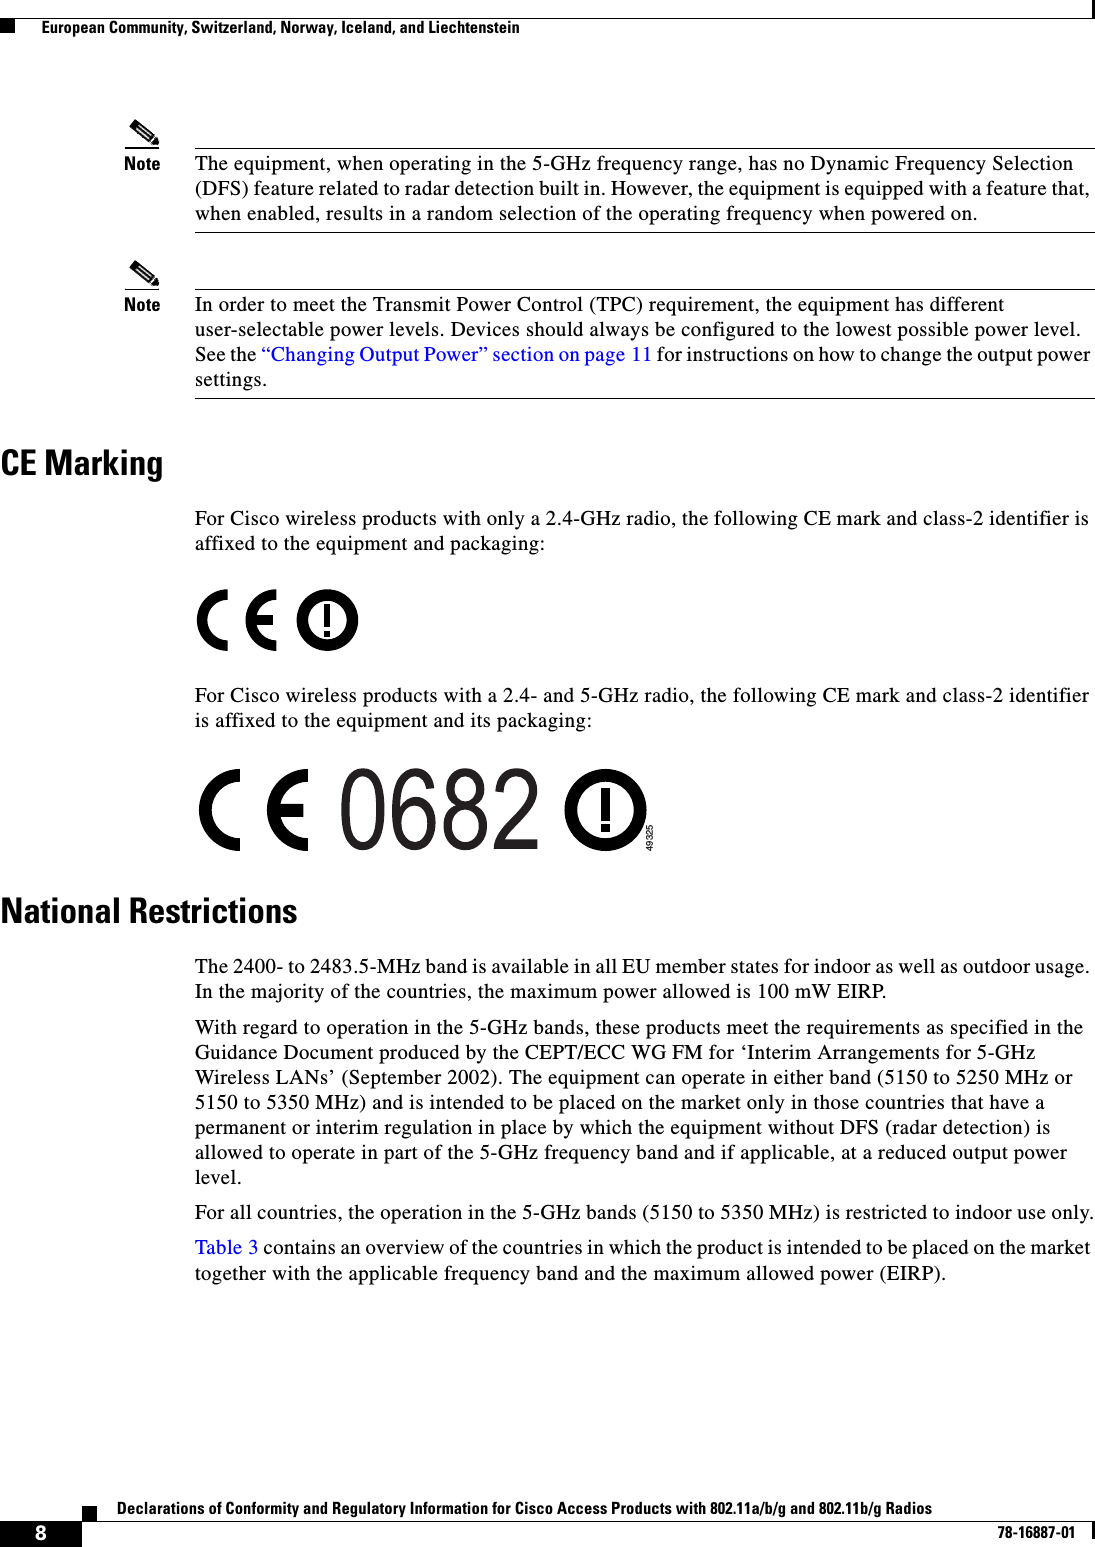  8Declarations of Conformity and Regulatory Information for Cisco Access Products with 802.11a/b/g and 802.11b/g Radios78-16887-01  European Community, Switzerland, Norway, Iceland, and LiechtensteinNote The equipment, when operating in the 5-GHz frequency range, has no Dynamic Frequency Selection (DFS) feature related to radar detection built in. However, the equipment is equipped with a feature that, when enabled, results in a random selection of the operating frequency when powered on.Note In order to meet the Transmit Power Control (TPC) requirement, the equipment has different user-selectable power levels. Devices should always be configured to the lowest possible power level. See the “Changing Output Power” section on page 11 for instructions on how to change the output power settings.CE MarkingFor Cisco wireless products with only a 2.4-GHz radio, the following CE mark and class-2 identifier is affixed to the equipment and packaging:For Cisco wireless products with a 2.4- and 5-GHz radio, the following CE mark and class-2 identifier is affixed to the equipment and its packaging:National RestrictionsThe 2400- to 2483.5-MHz band is available in all EU member states for indoor as well as outdoor usage. In the majority of the countries, the maximum power allowed is 100 mW EIRP.With regard to operation in the 5-GHz bands, these products meet the requirements as specified in the Guidance Document produced by the CEPT/ECC WG FM for ‘Interim Arrangements for 5-GHz Wireless LANs’ (September 2002). The equipment can operate in either band (5150 to 5250 MHz or 5150 to 5350 MHz) and is intended to be placed on the market only in those countries that have a permanent or interim regulation in place by which the equipment without DFS (radar detection) is allowed to operate in part of the 5-GHz frequency band and if applicable, at a reduced output power level.For all countries, the operation in the 5-GHz bands (5150 to 5350 MHz) is restricted to indoor use only.Table 3 contains an overview of the countries in which the product is intended to be placed on the market together with the applicable frequency band and the maximum allowed power (EIRP).49325